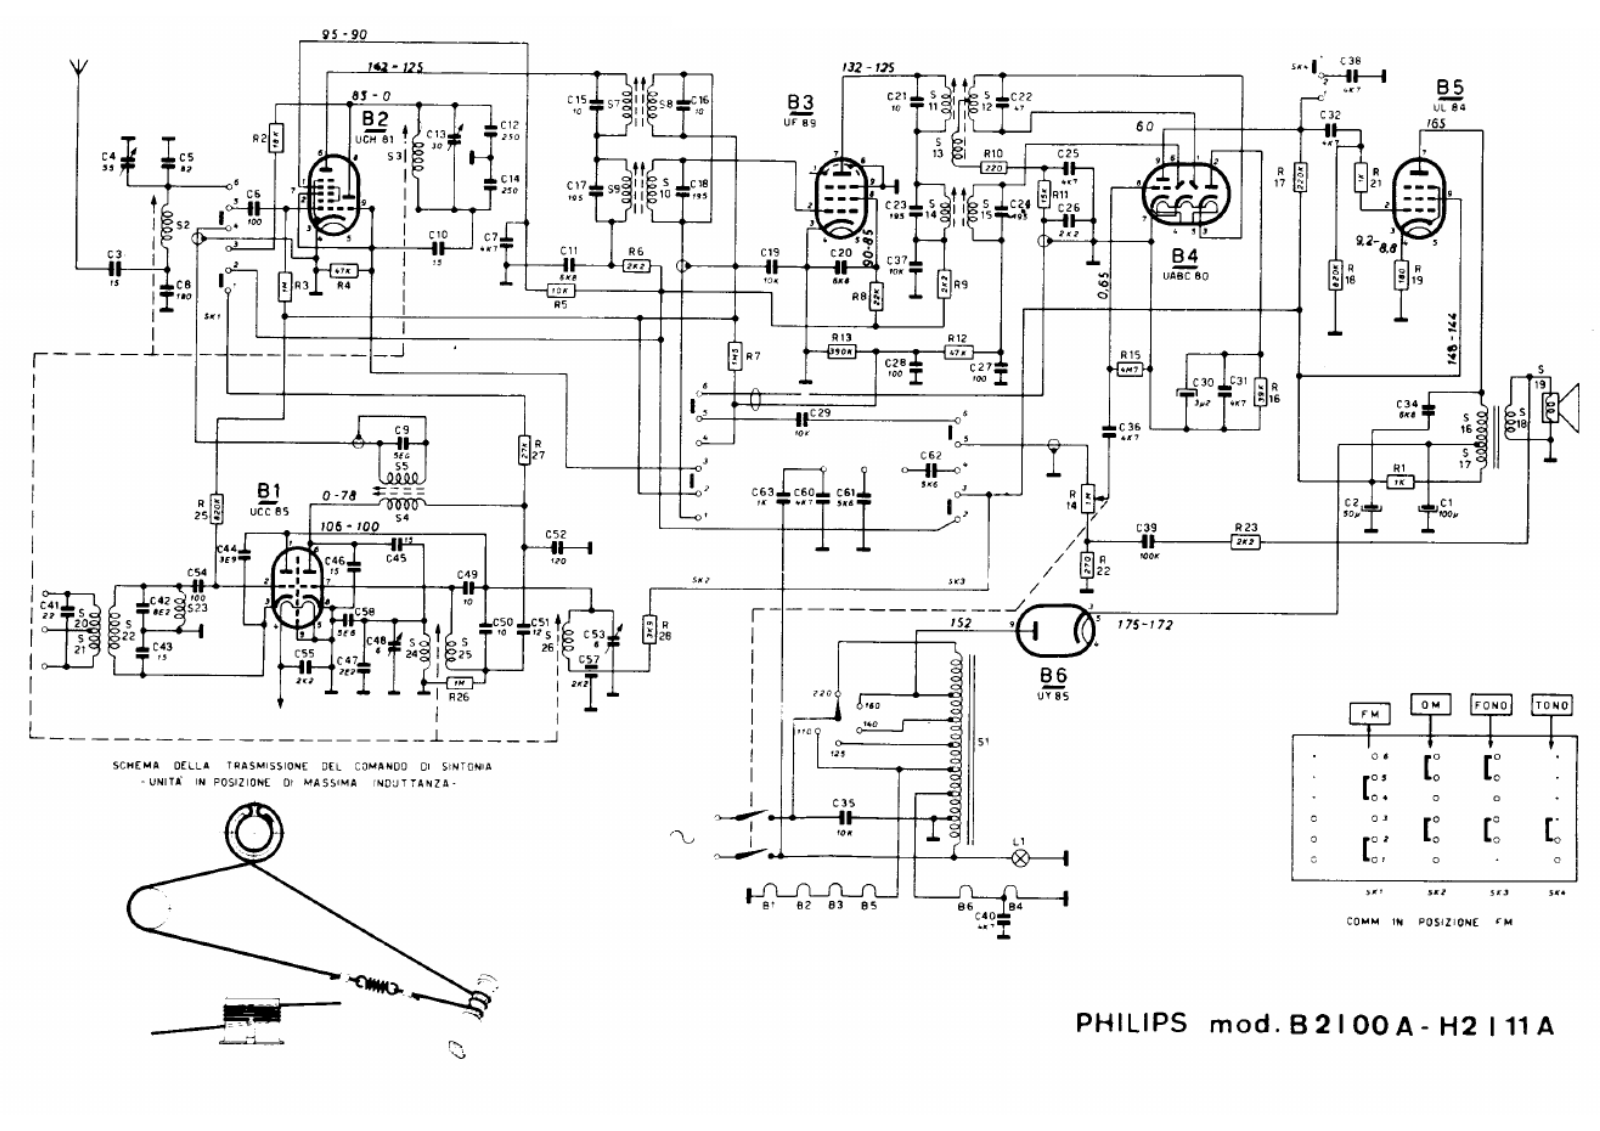 Philips b2i00a, h2i11a schematic